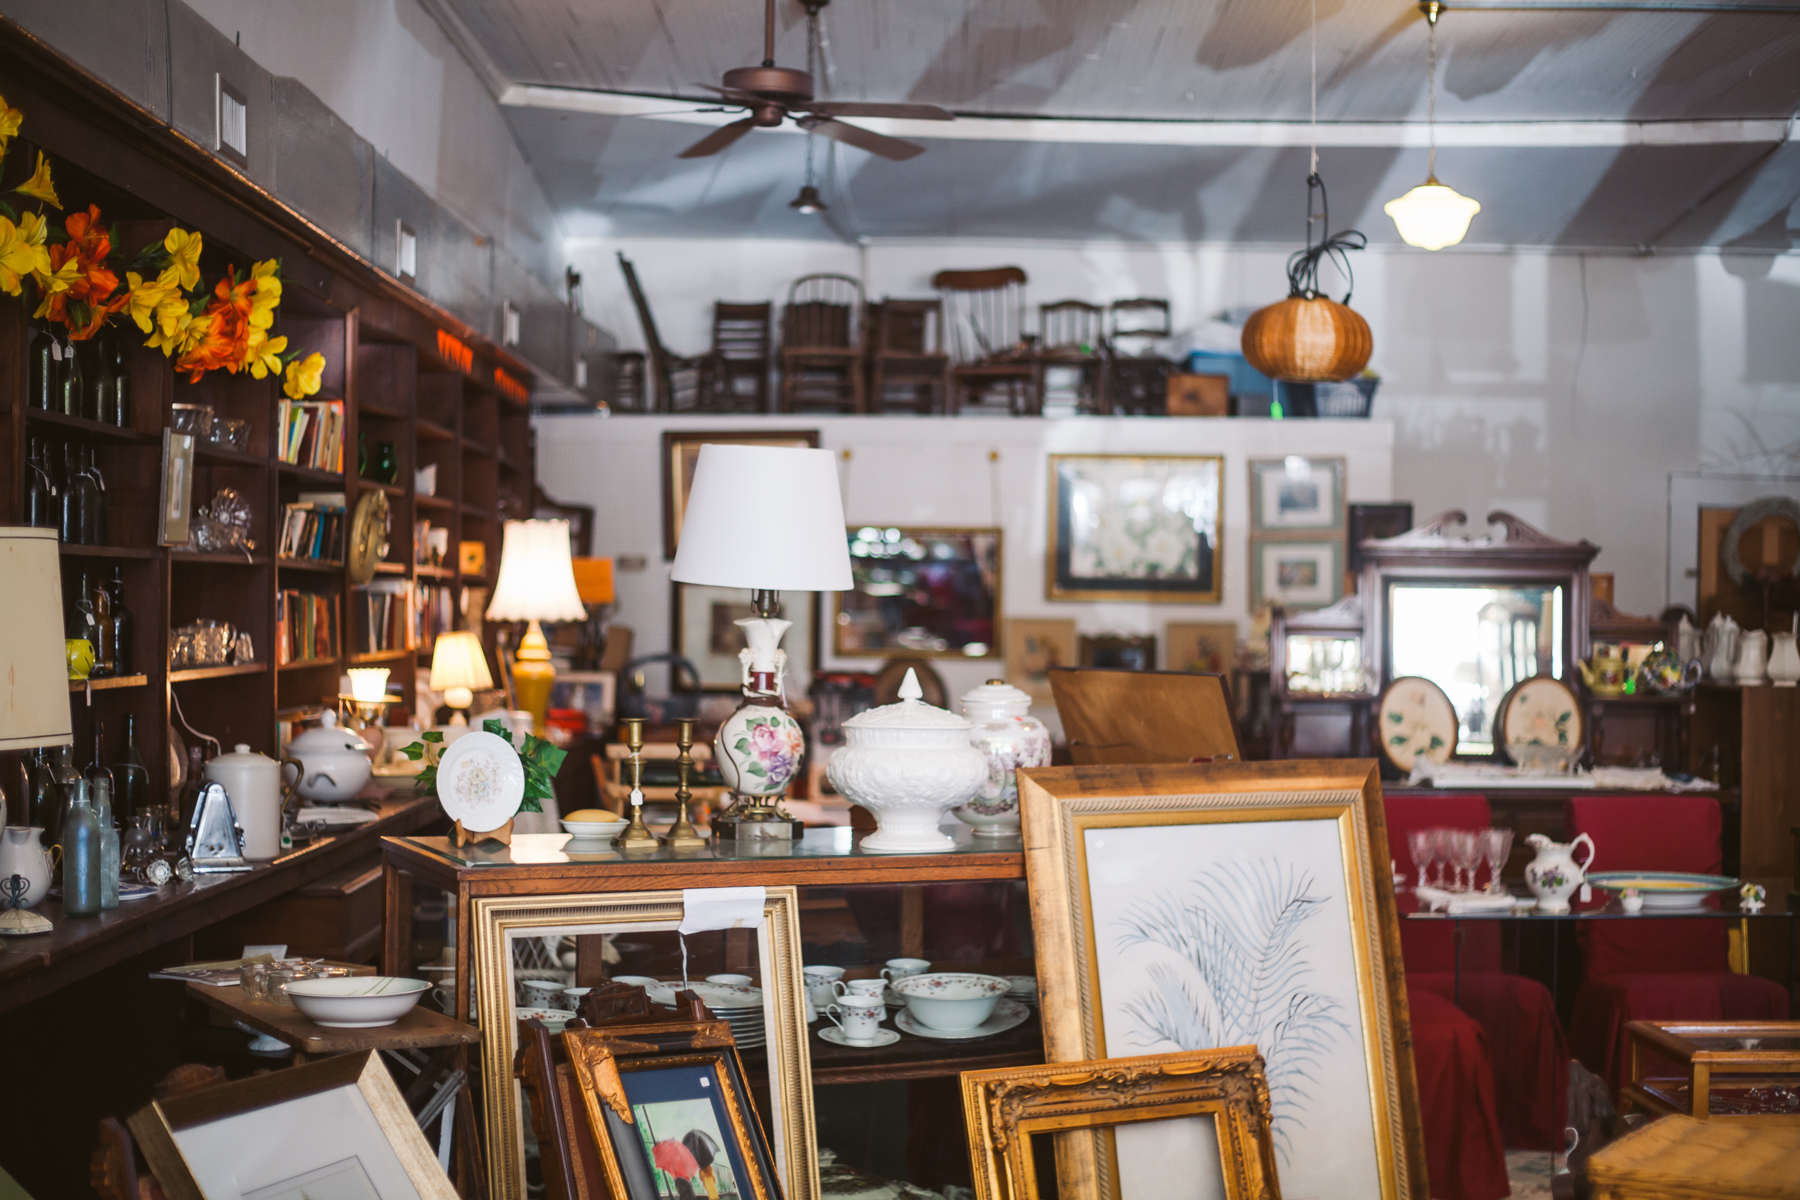  Ruby also owns an antique store that she and Dan opened together. Her son Dan Jr. now runs the shop.   “The building we bought in the early eighties. Dan liked to piddle with antiques—it started with that. We had a lot of dreams of traveling and doi